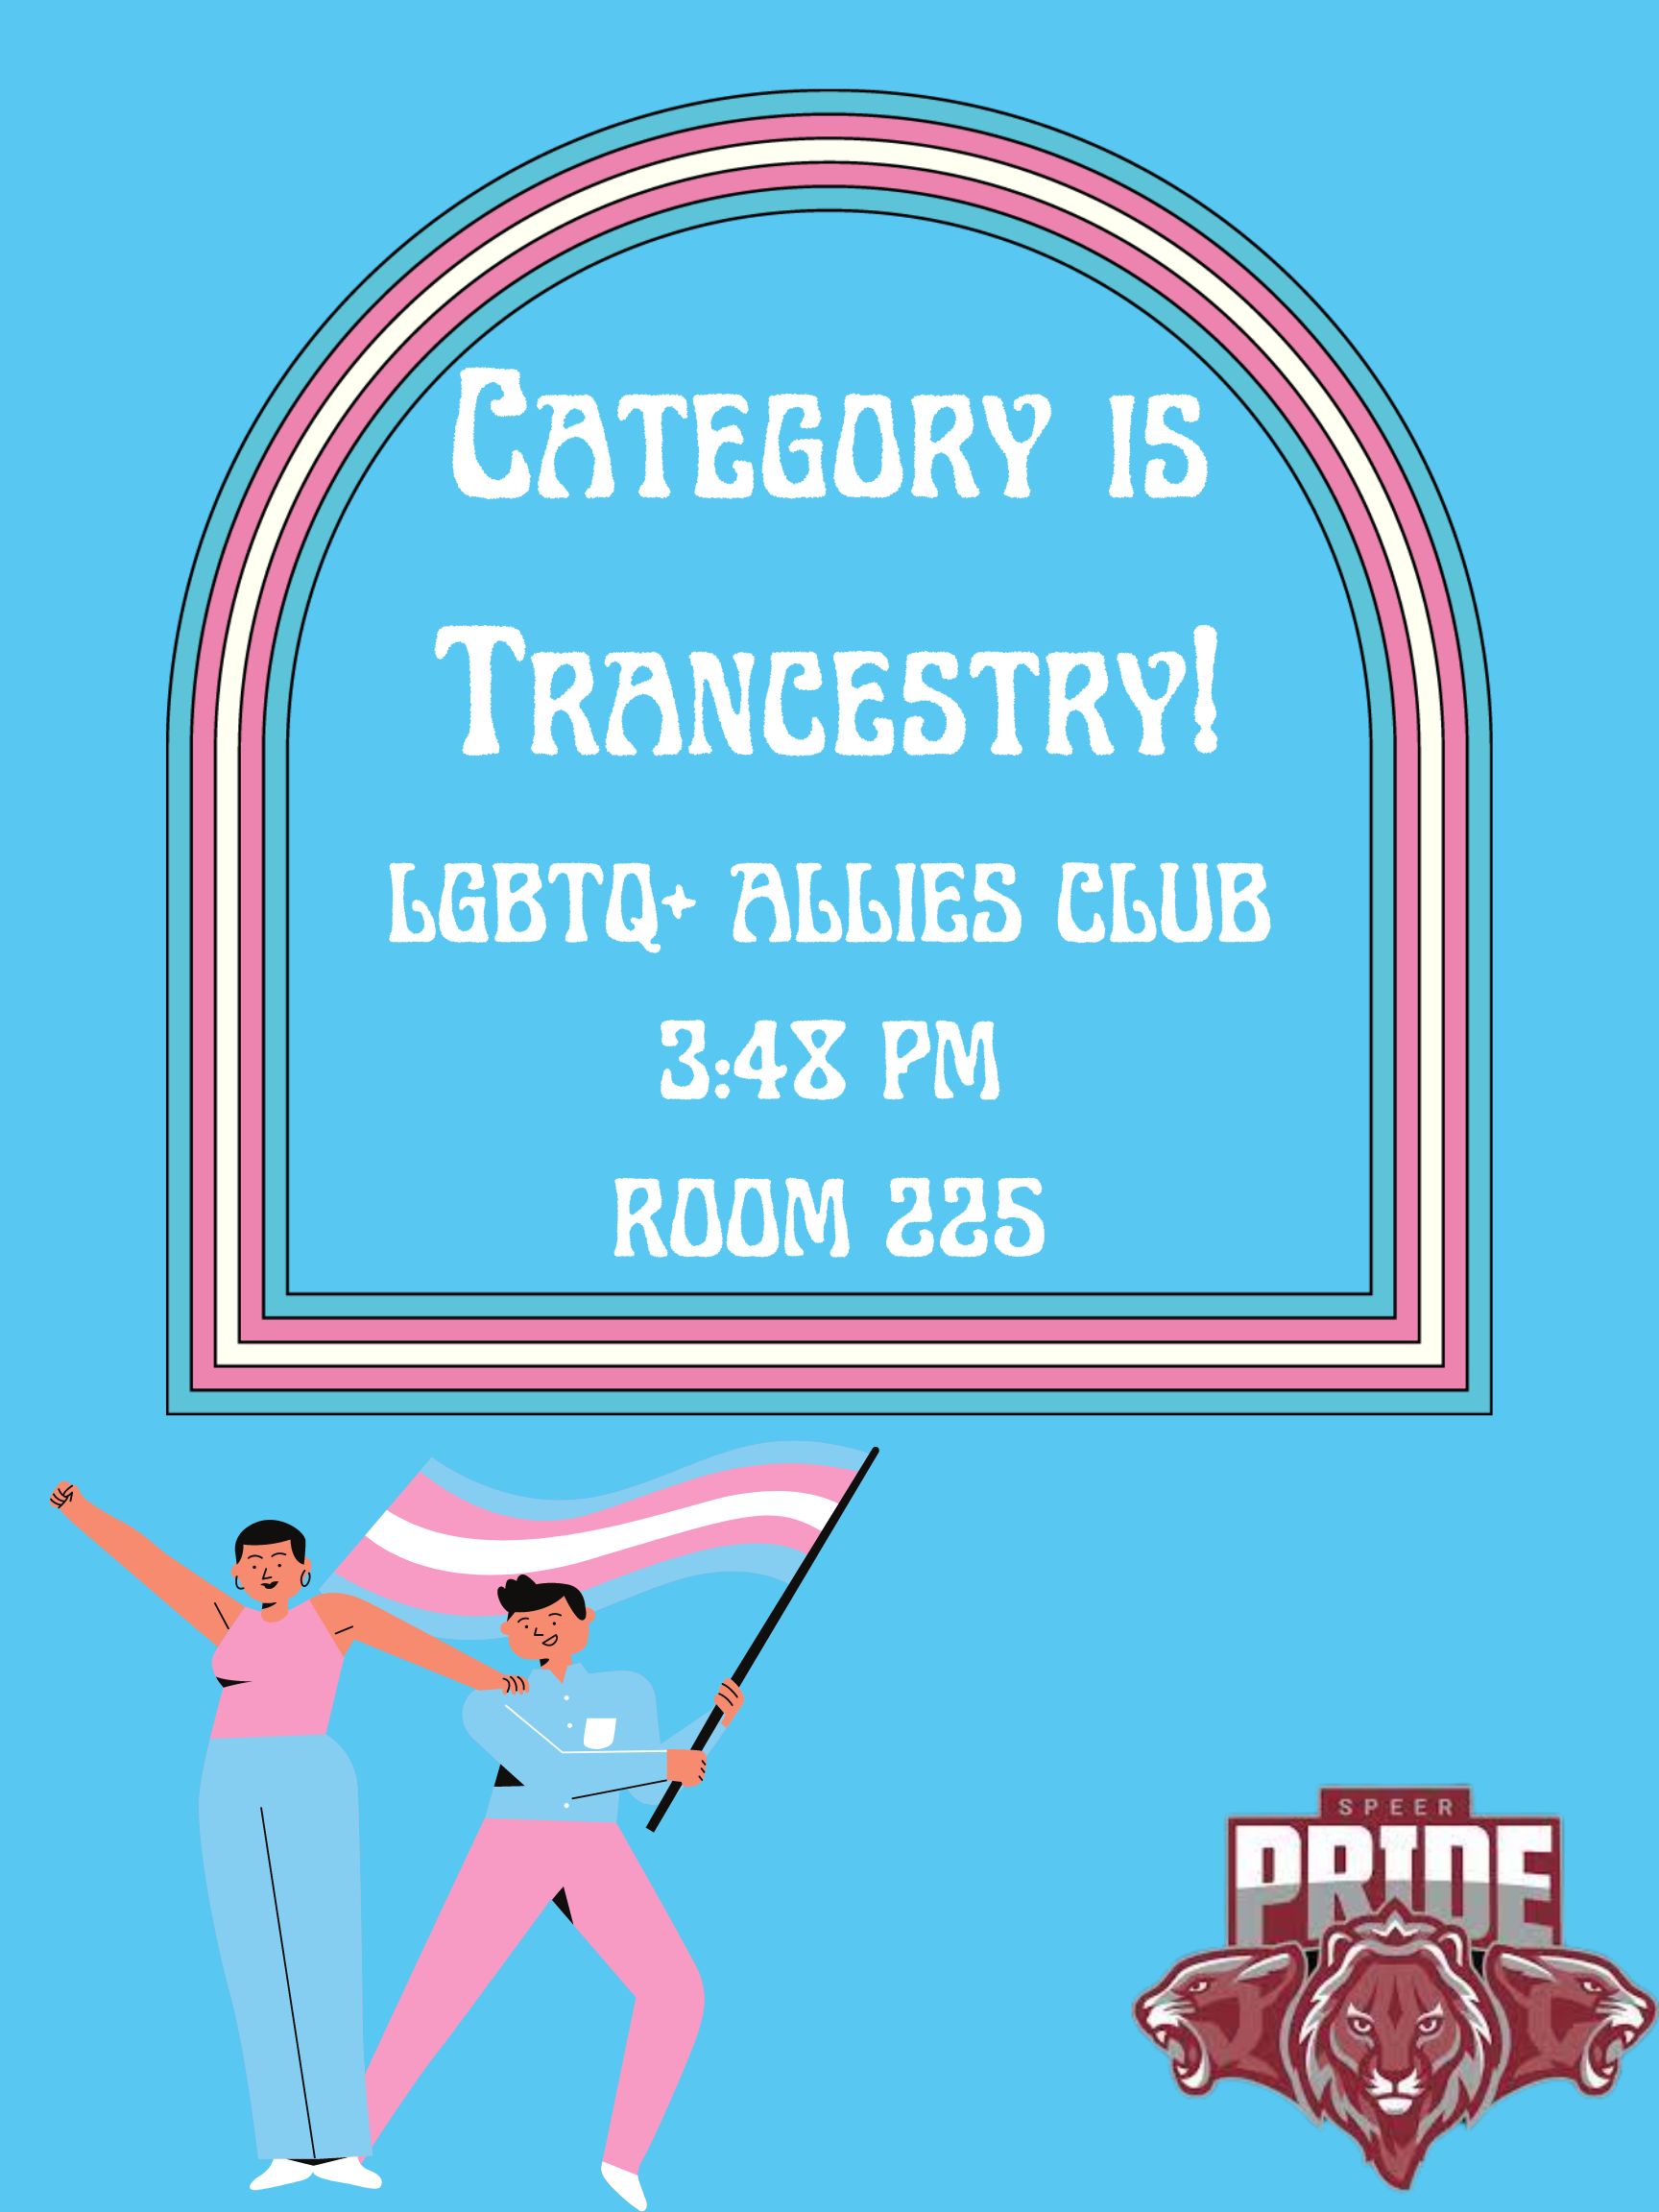 The graphic is a poster for a Speer Pride club event with a bright baby blue background. The event title is at the top and reads "Category is Transcestry". Underneath the title is the information about the event, which say "LGBTQ+ Allies Club, 3:48 PM, Room 225". The title and information is surrounded by a curved frame with the trans colors on it (blue, pink, and white). Underneath the frame is a graphic of two people wearing trans colors and waving a trans flag. In the bottom right corner is the ITW David Speer Academy lion pride mascot logo.